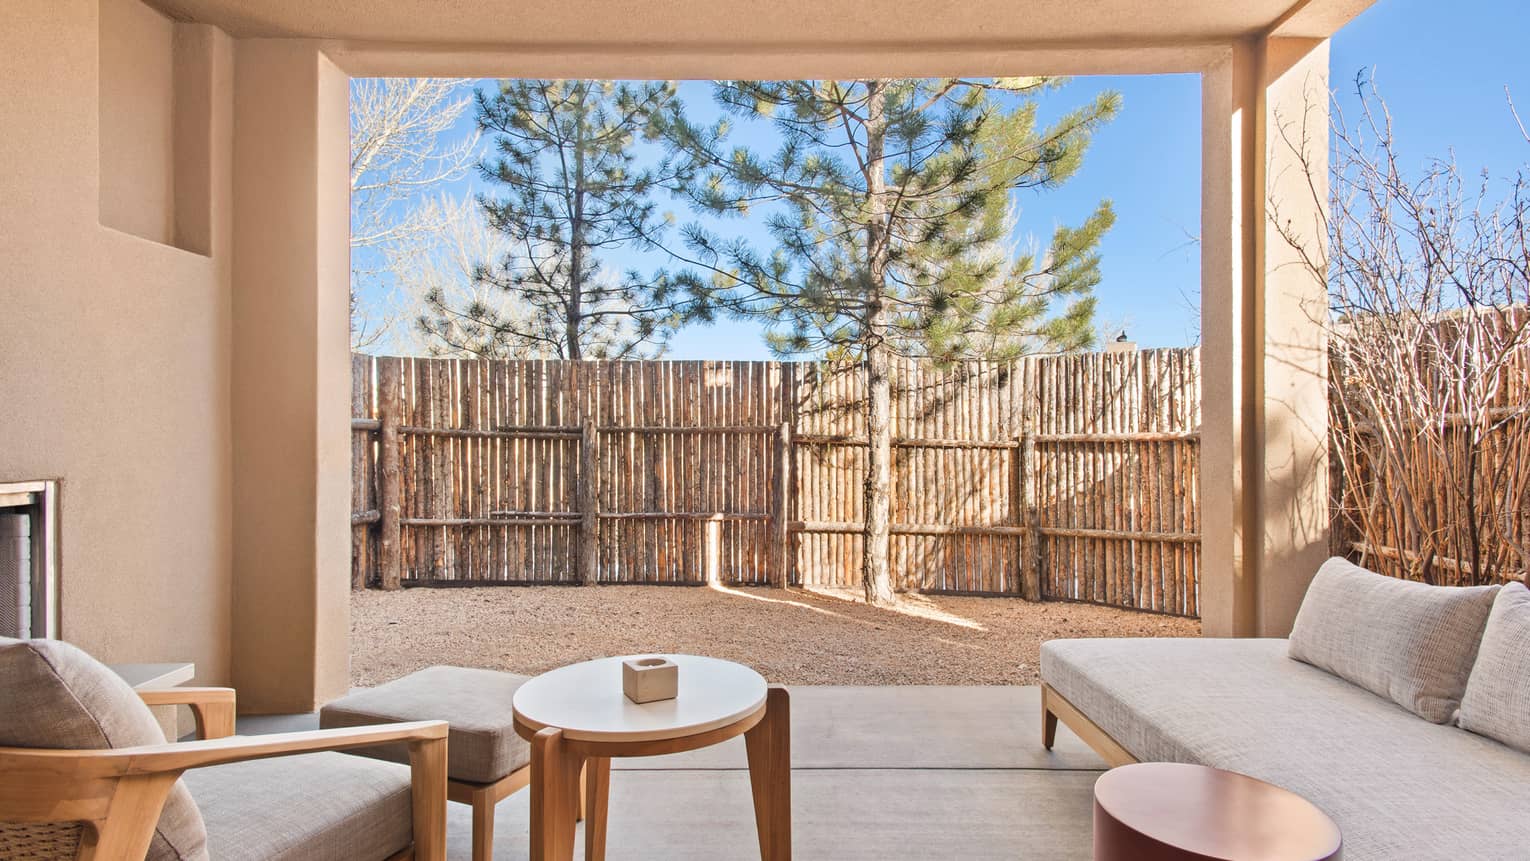 Private patio of a Casita Room, complete with fireplace and lounge chairs, at Four Seasons Resort Santa Fe